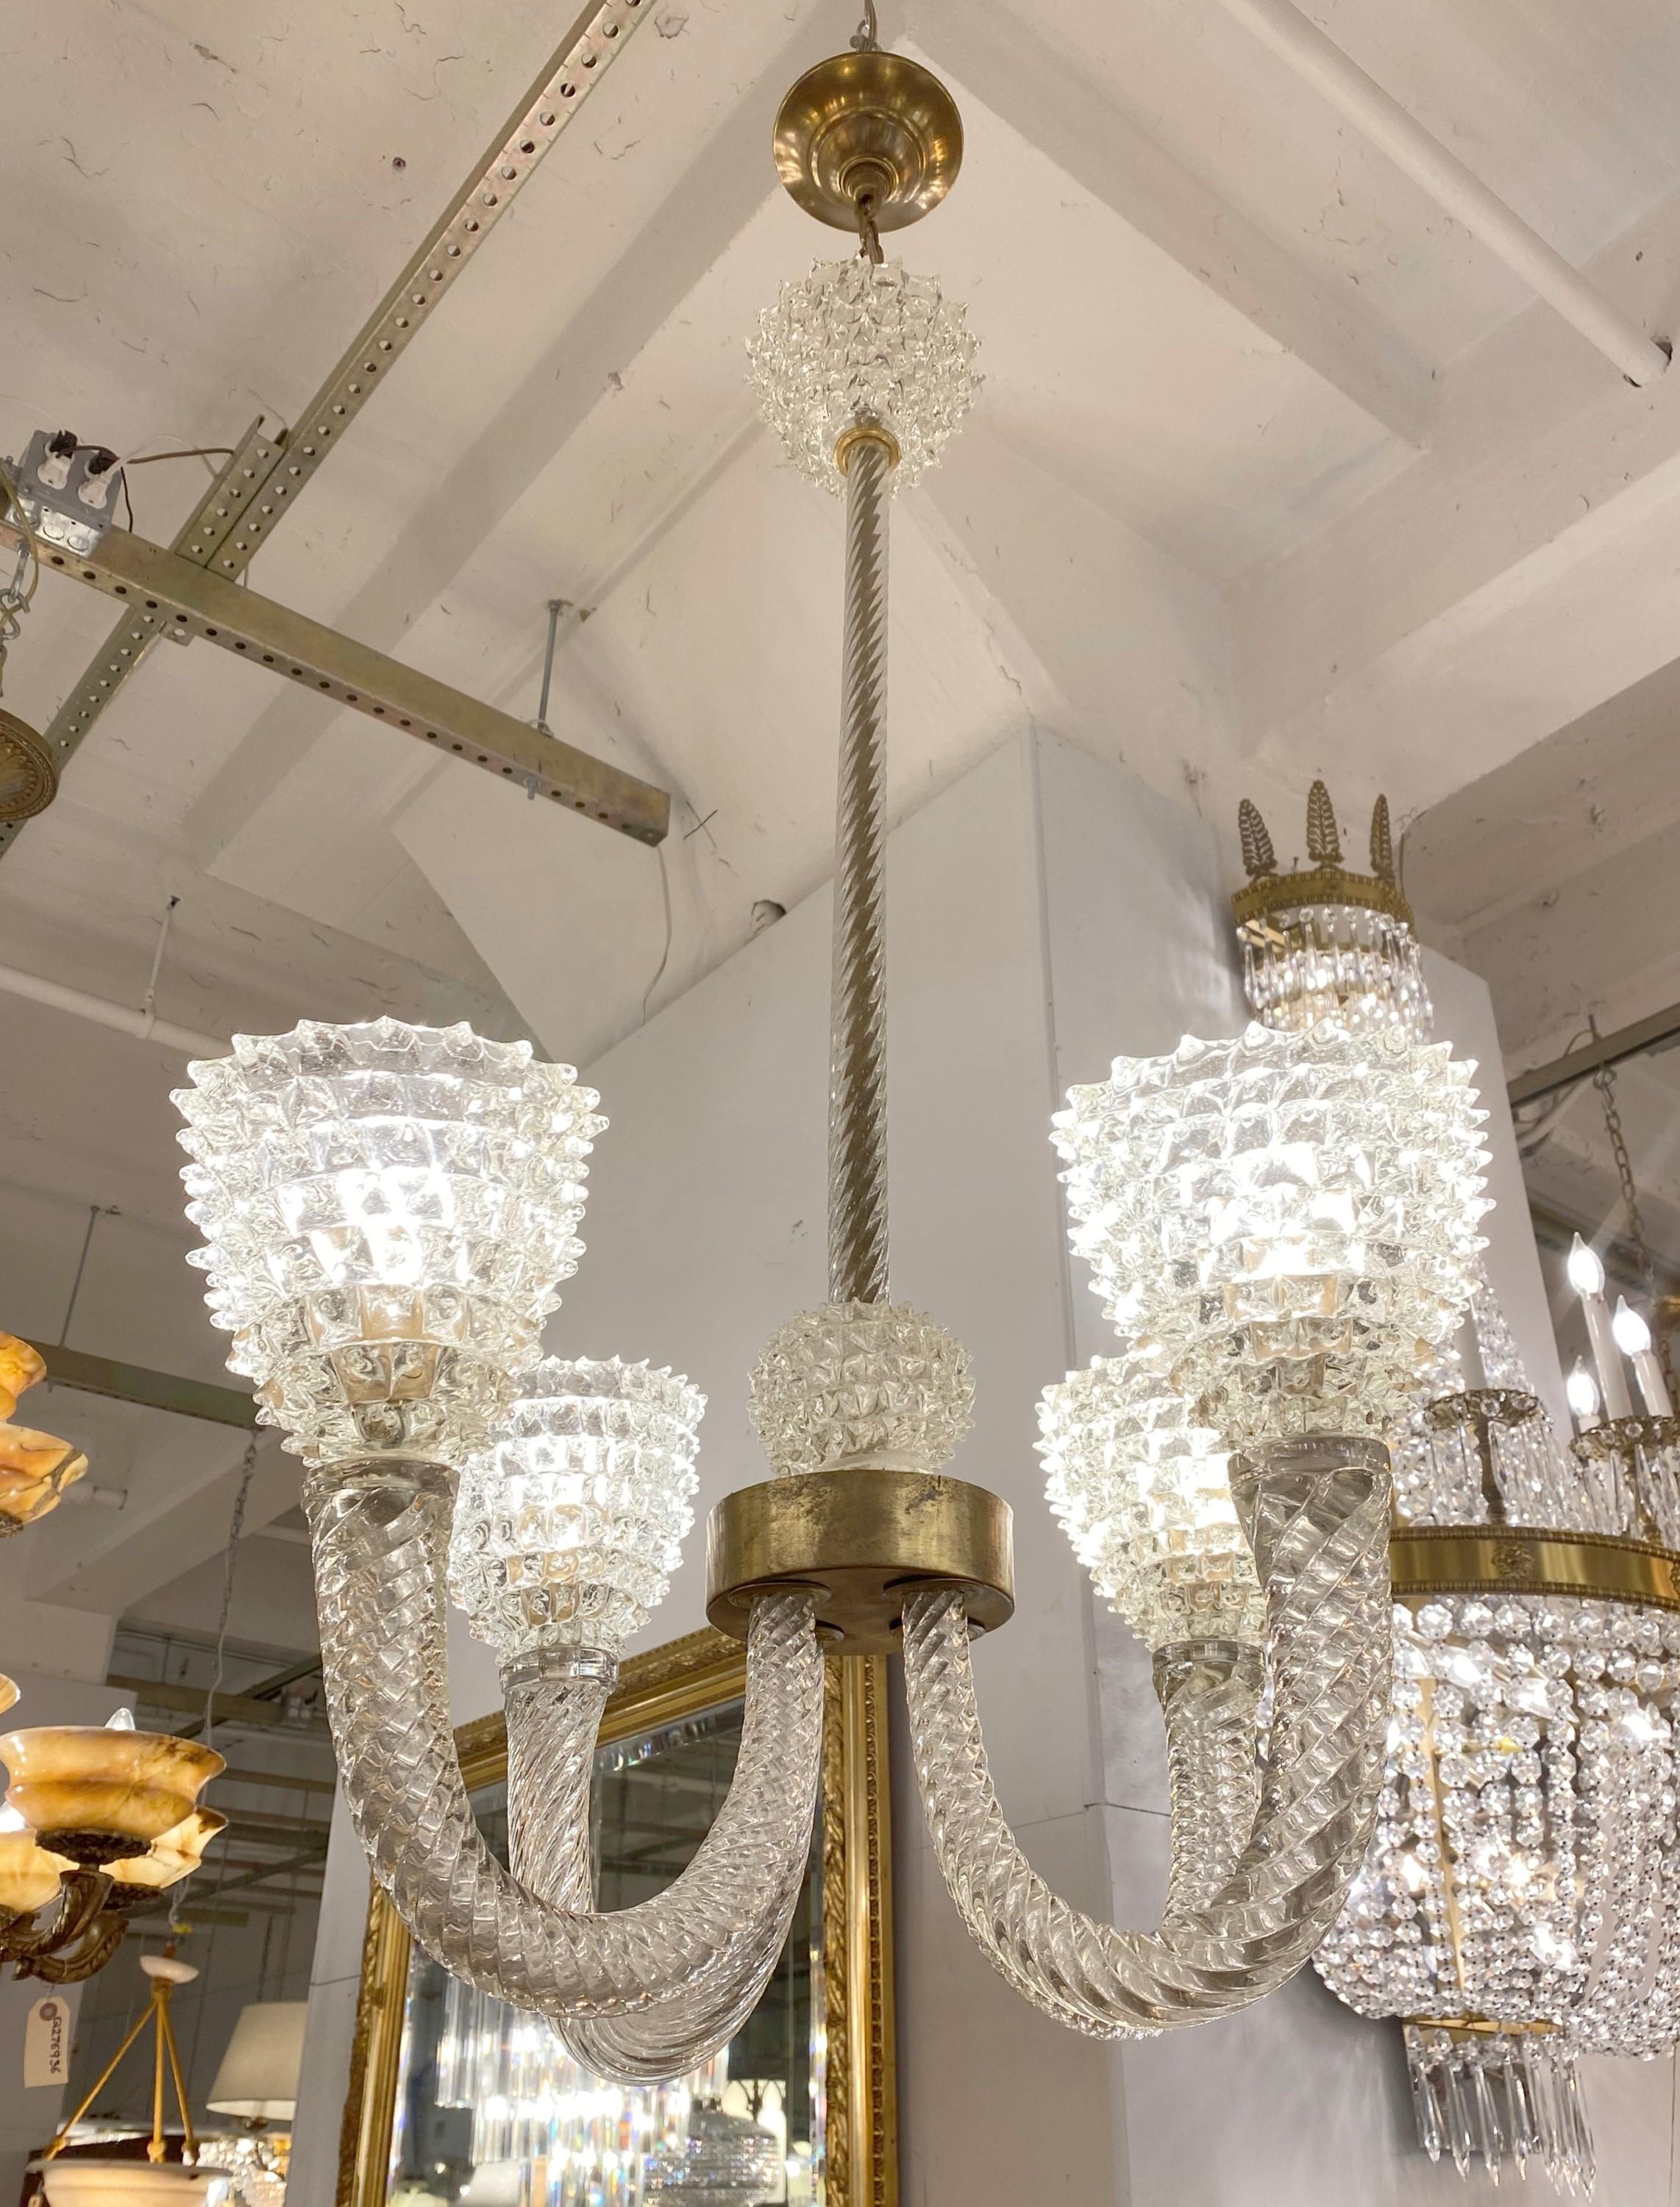 20th century four light chandelier manufactured out of clear Giaccio Murano glass mounted on a brass frame. Ghiaccio is the Italian word for ice applied here as the term for glass resembling crushed ice. Cleaned and restored. Please note, this item